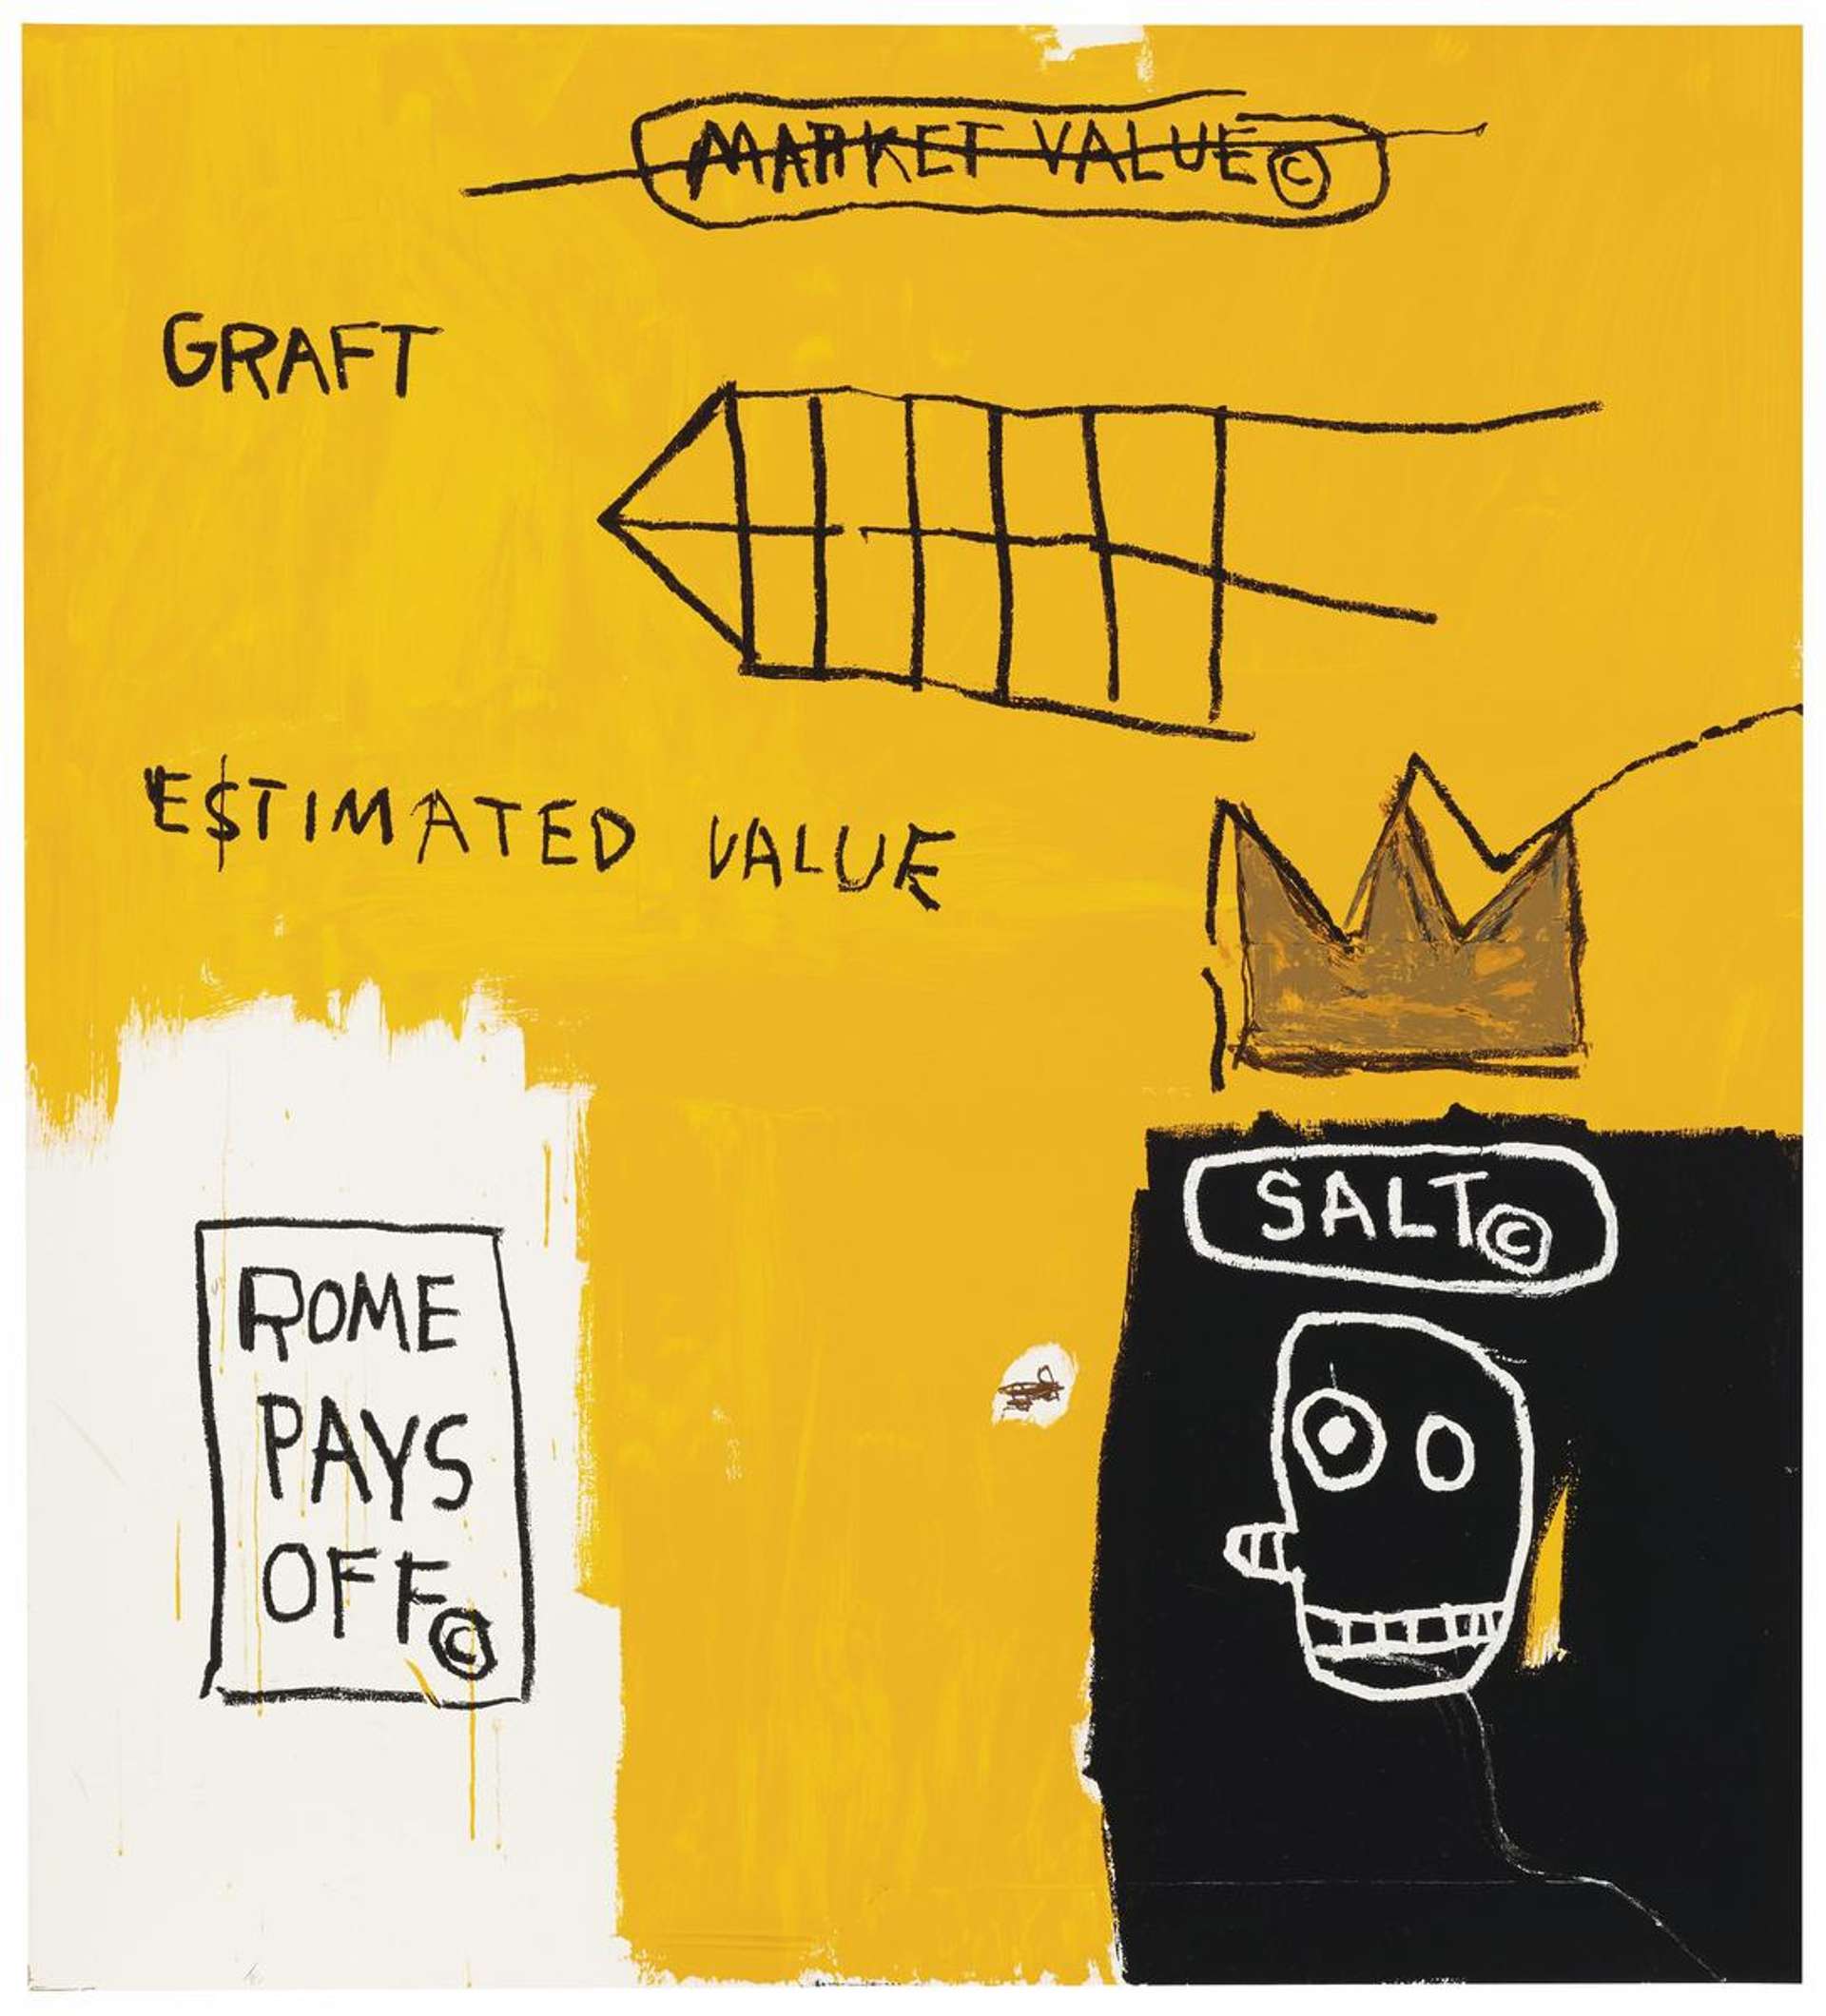 In this fairly sparse piece, a skeletal face is seen alongside a gold crown, and a grid-like form resembling a rocket, rendered in black. This ambiguous shape also suggests an upturned edifice. The titular text ‘Rome Pays Off’, enframed with the copyright sign.